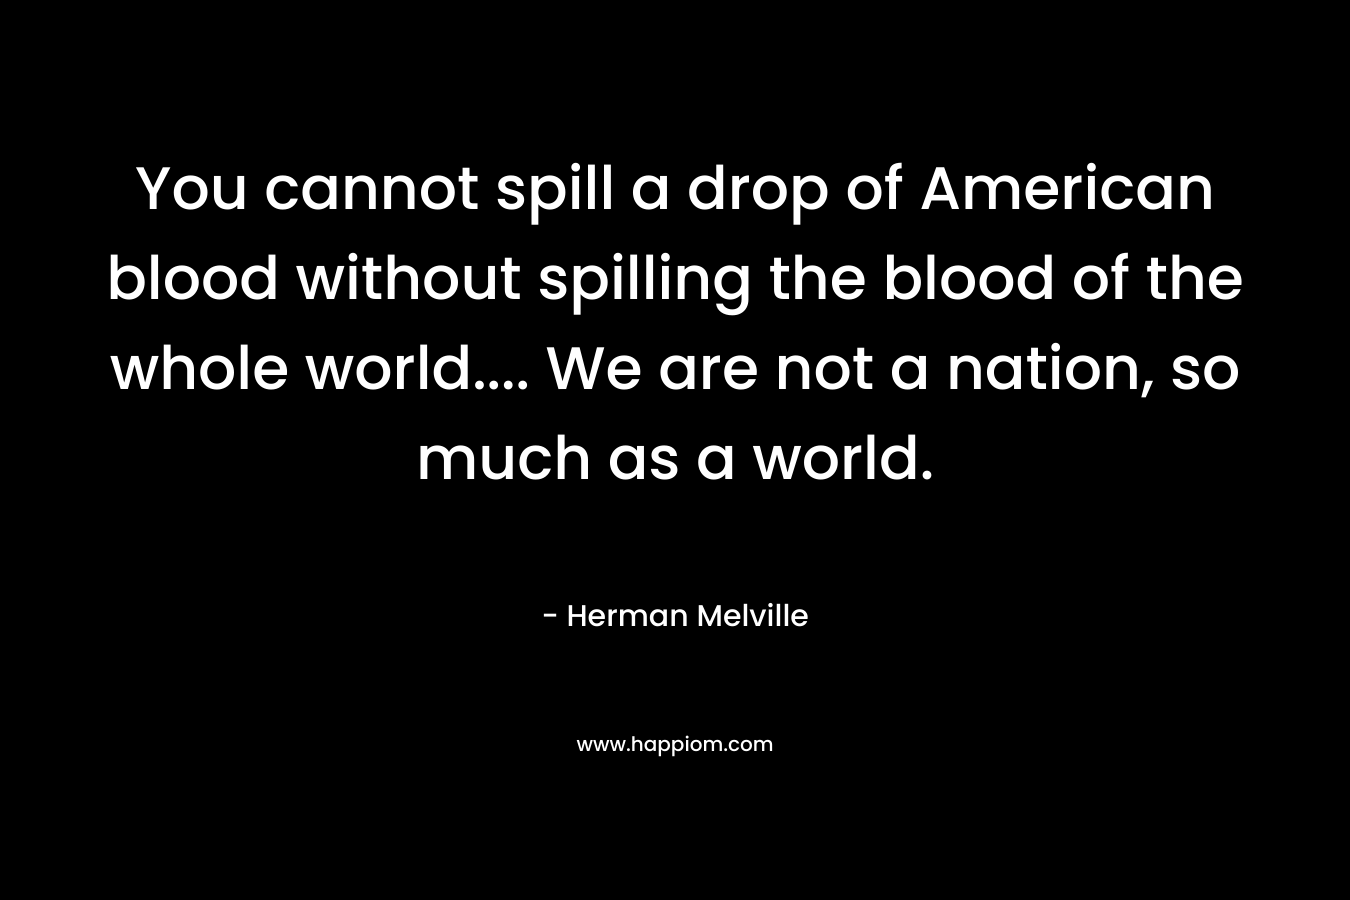 You cannot spill a drop of American blood without spilling the blood of the whole world…. We are not a nation, so much as a world. – Herman Melville